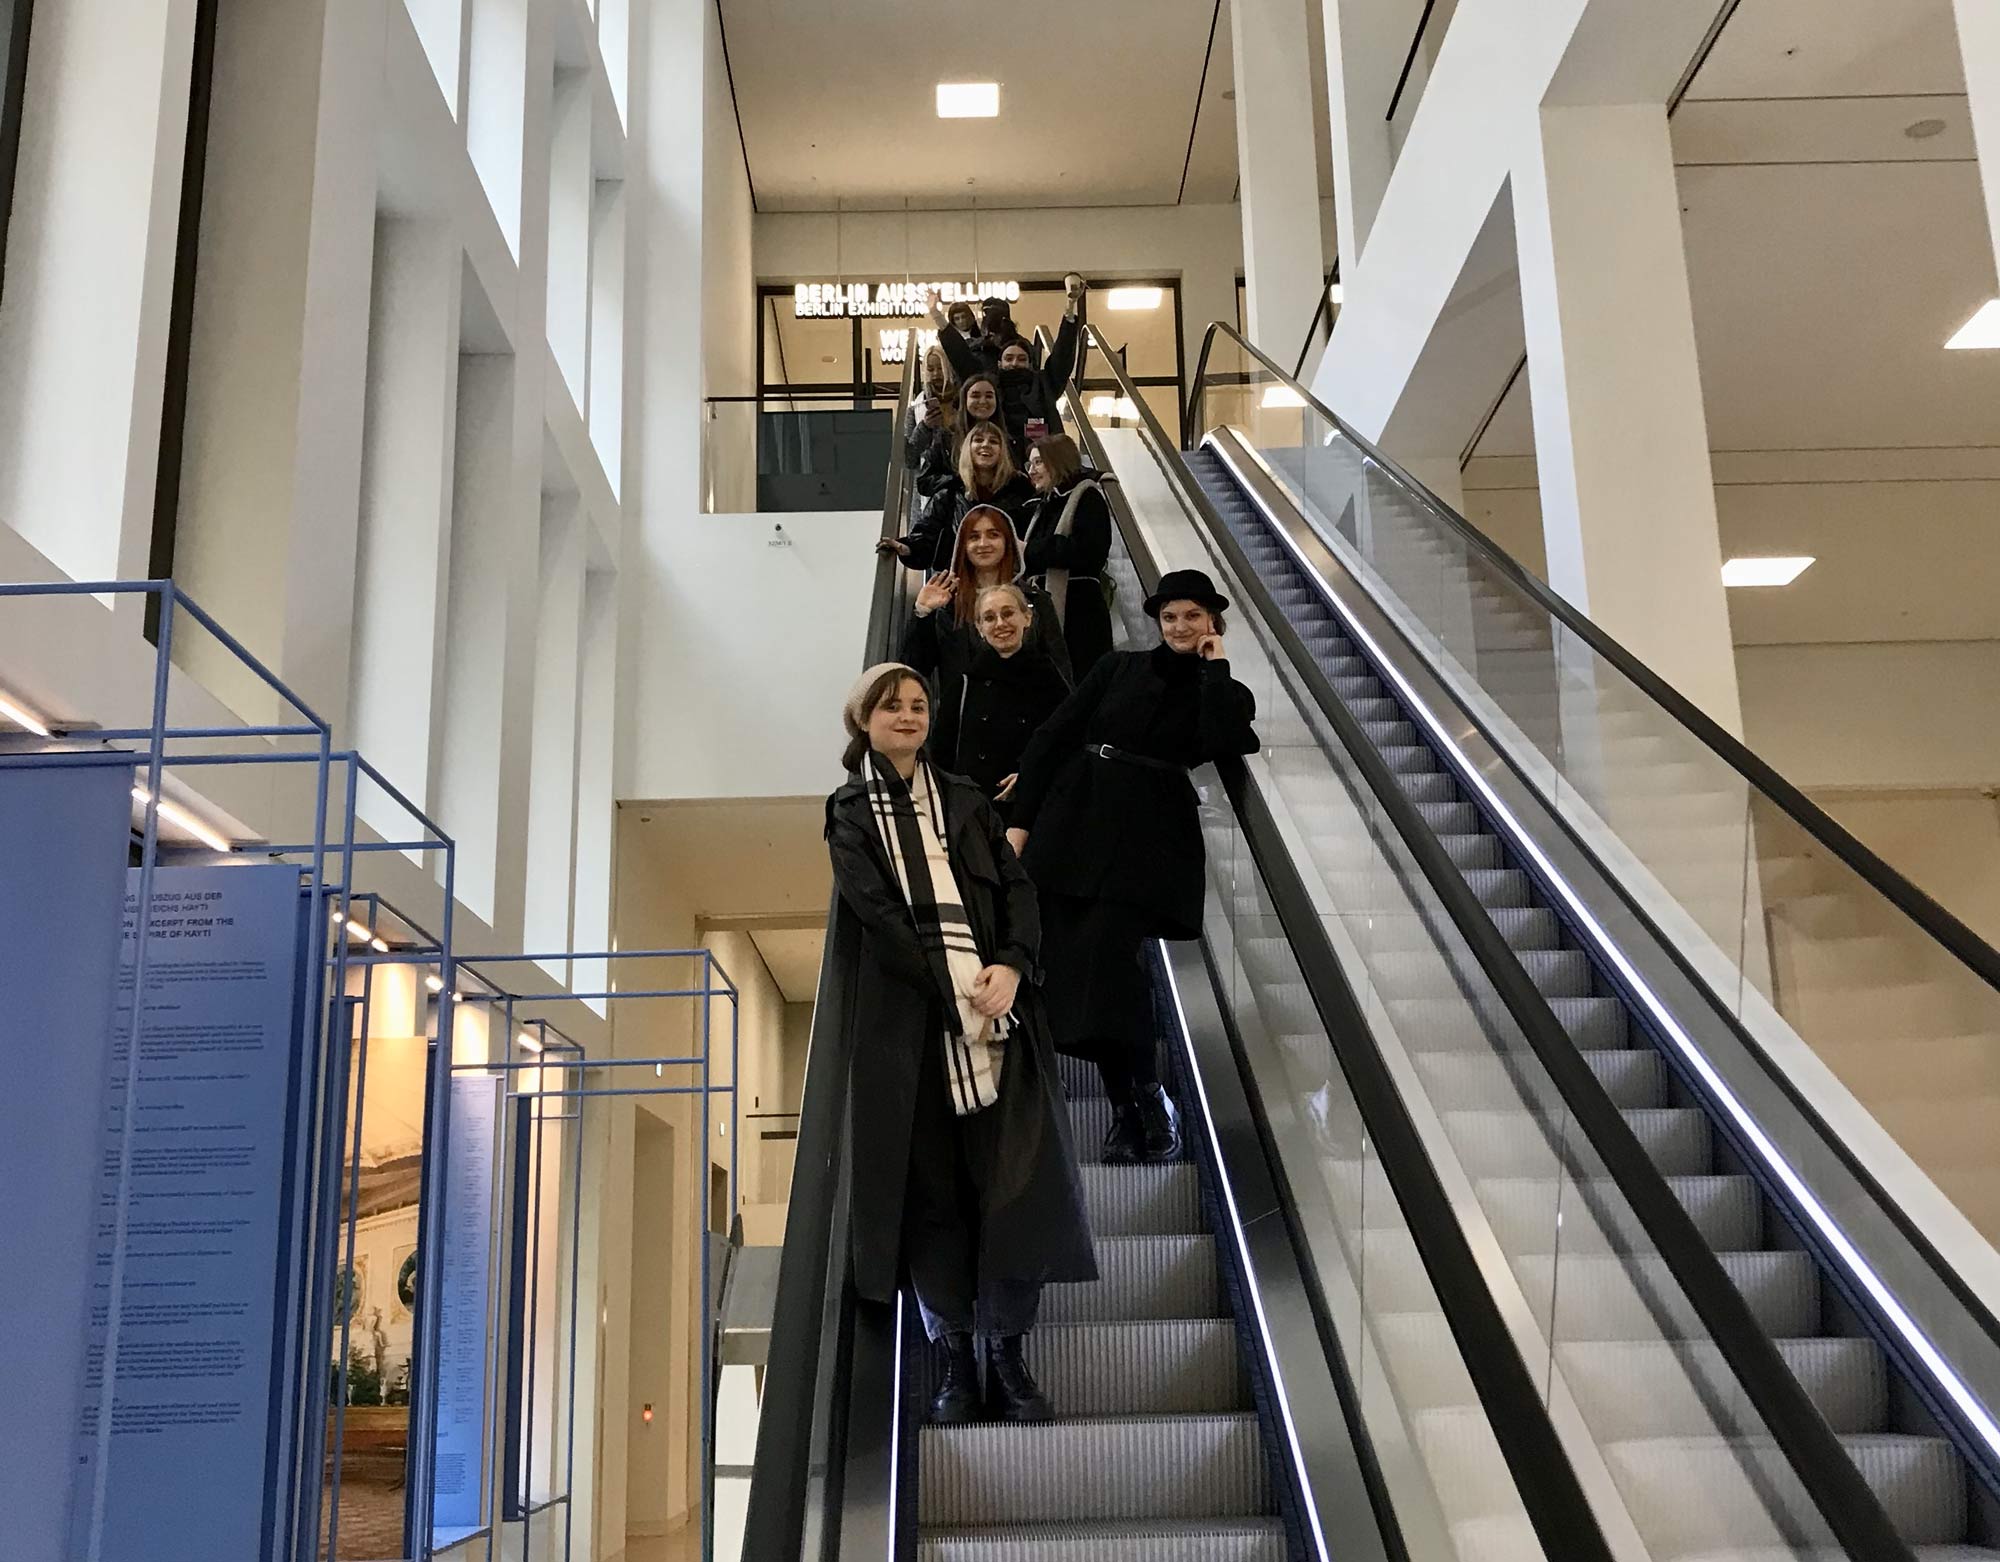 Participants of a study trip to Berlin standing on an escalator.